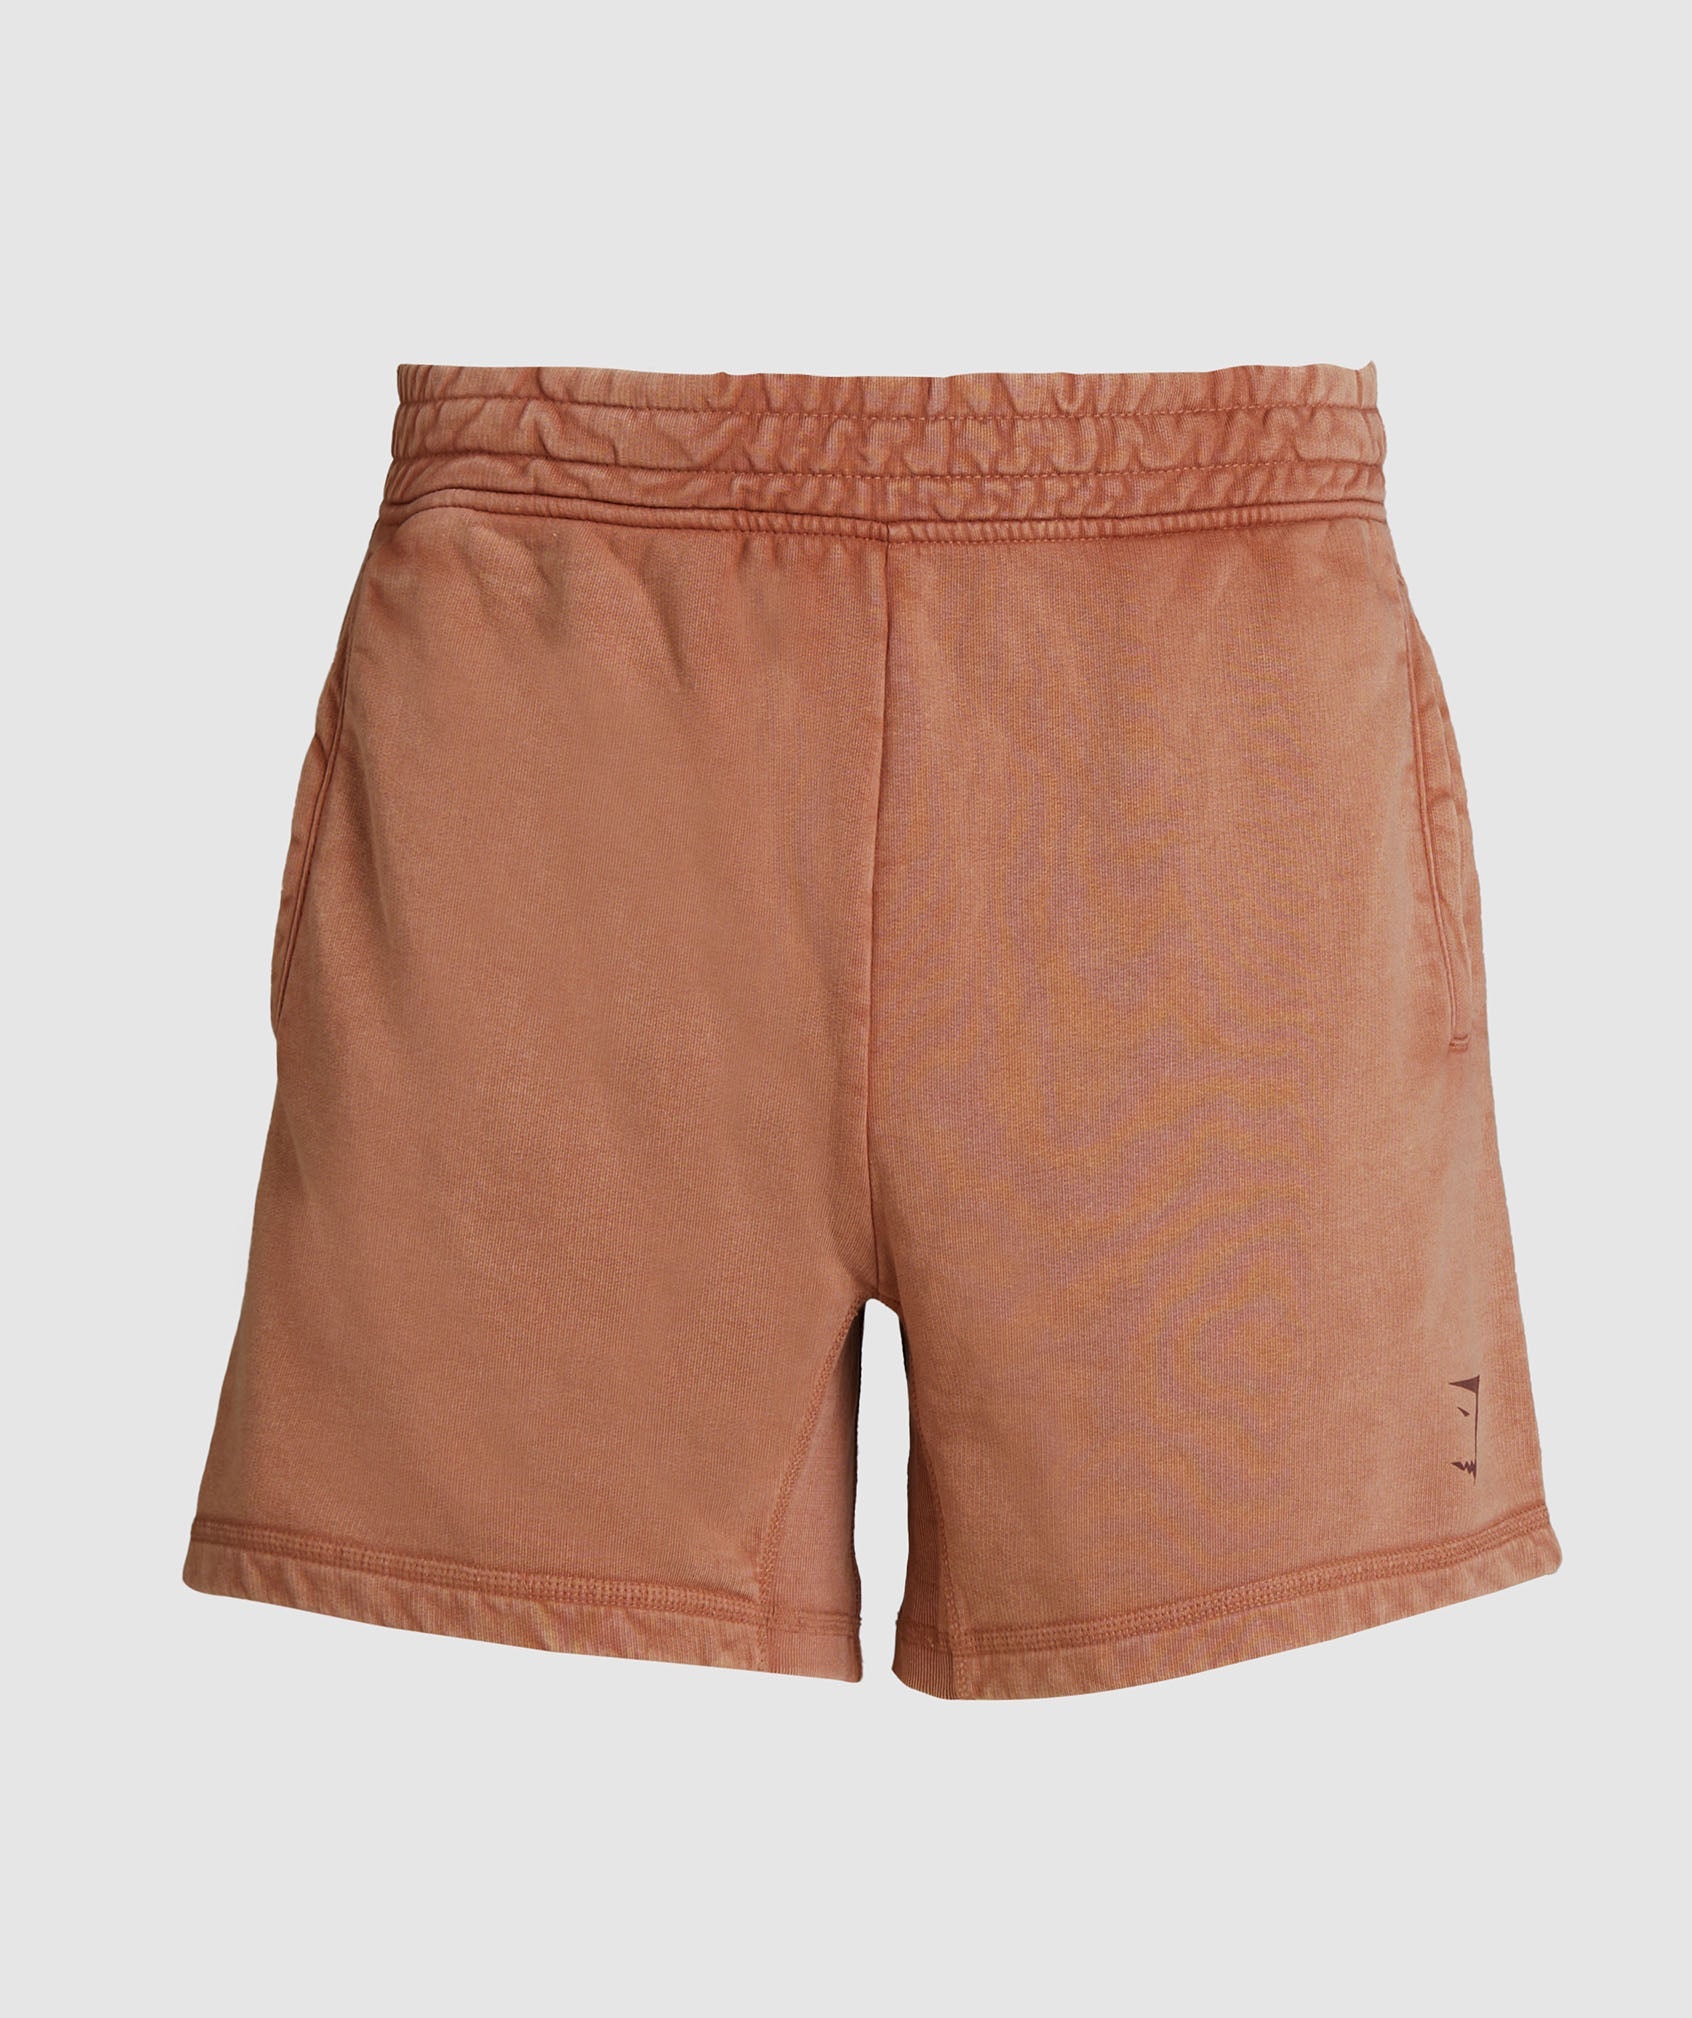 Power Washed 5" Shorts in Canyon Brown - view 7